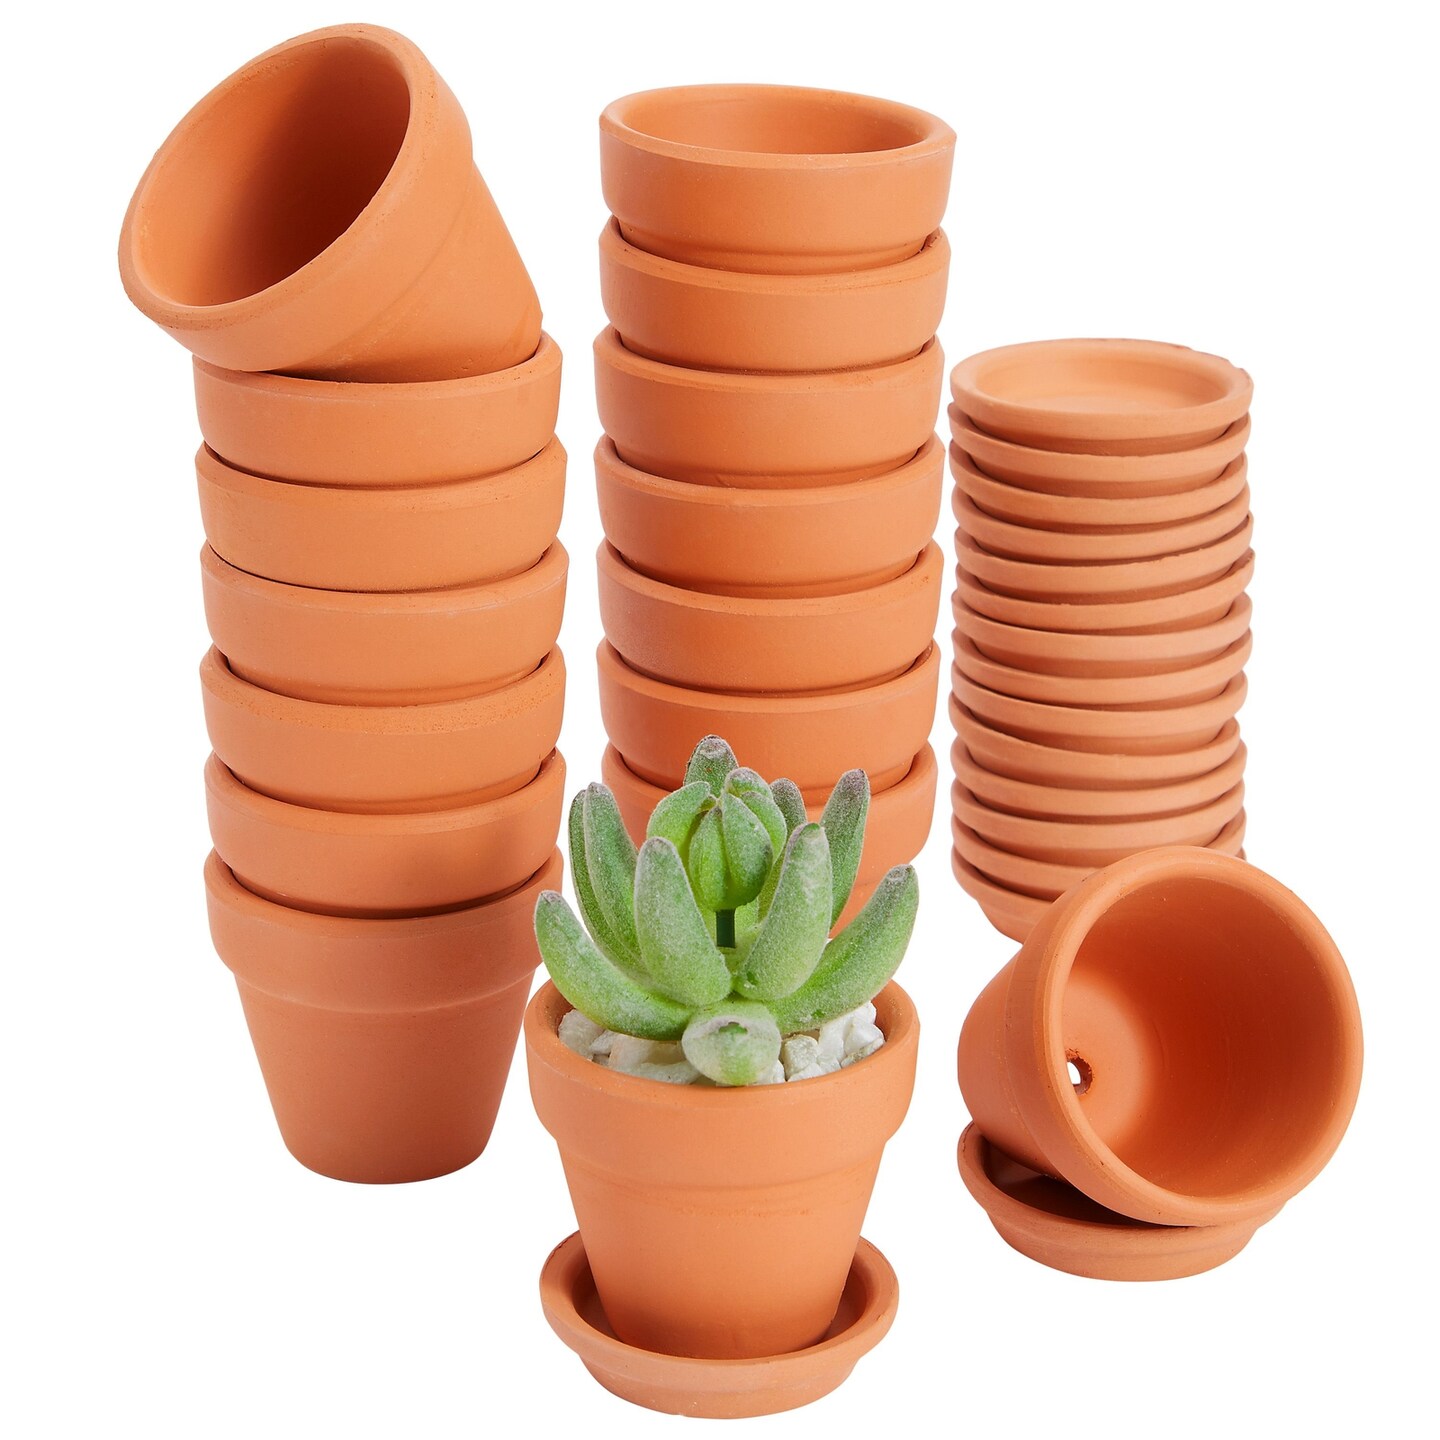 2-Inch 16-Pack Small Terracotta Pots with Saucers and Drainage Hole, Paintable Pottery for Succulents, Plants, Flowers, Cactus, Garden Nursery, and Wedding Decor